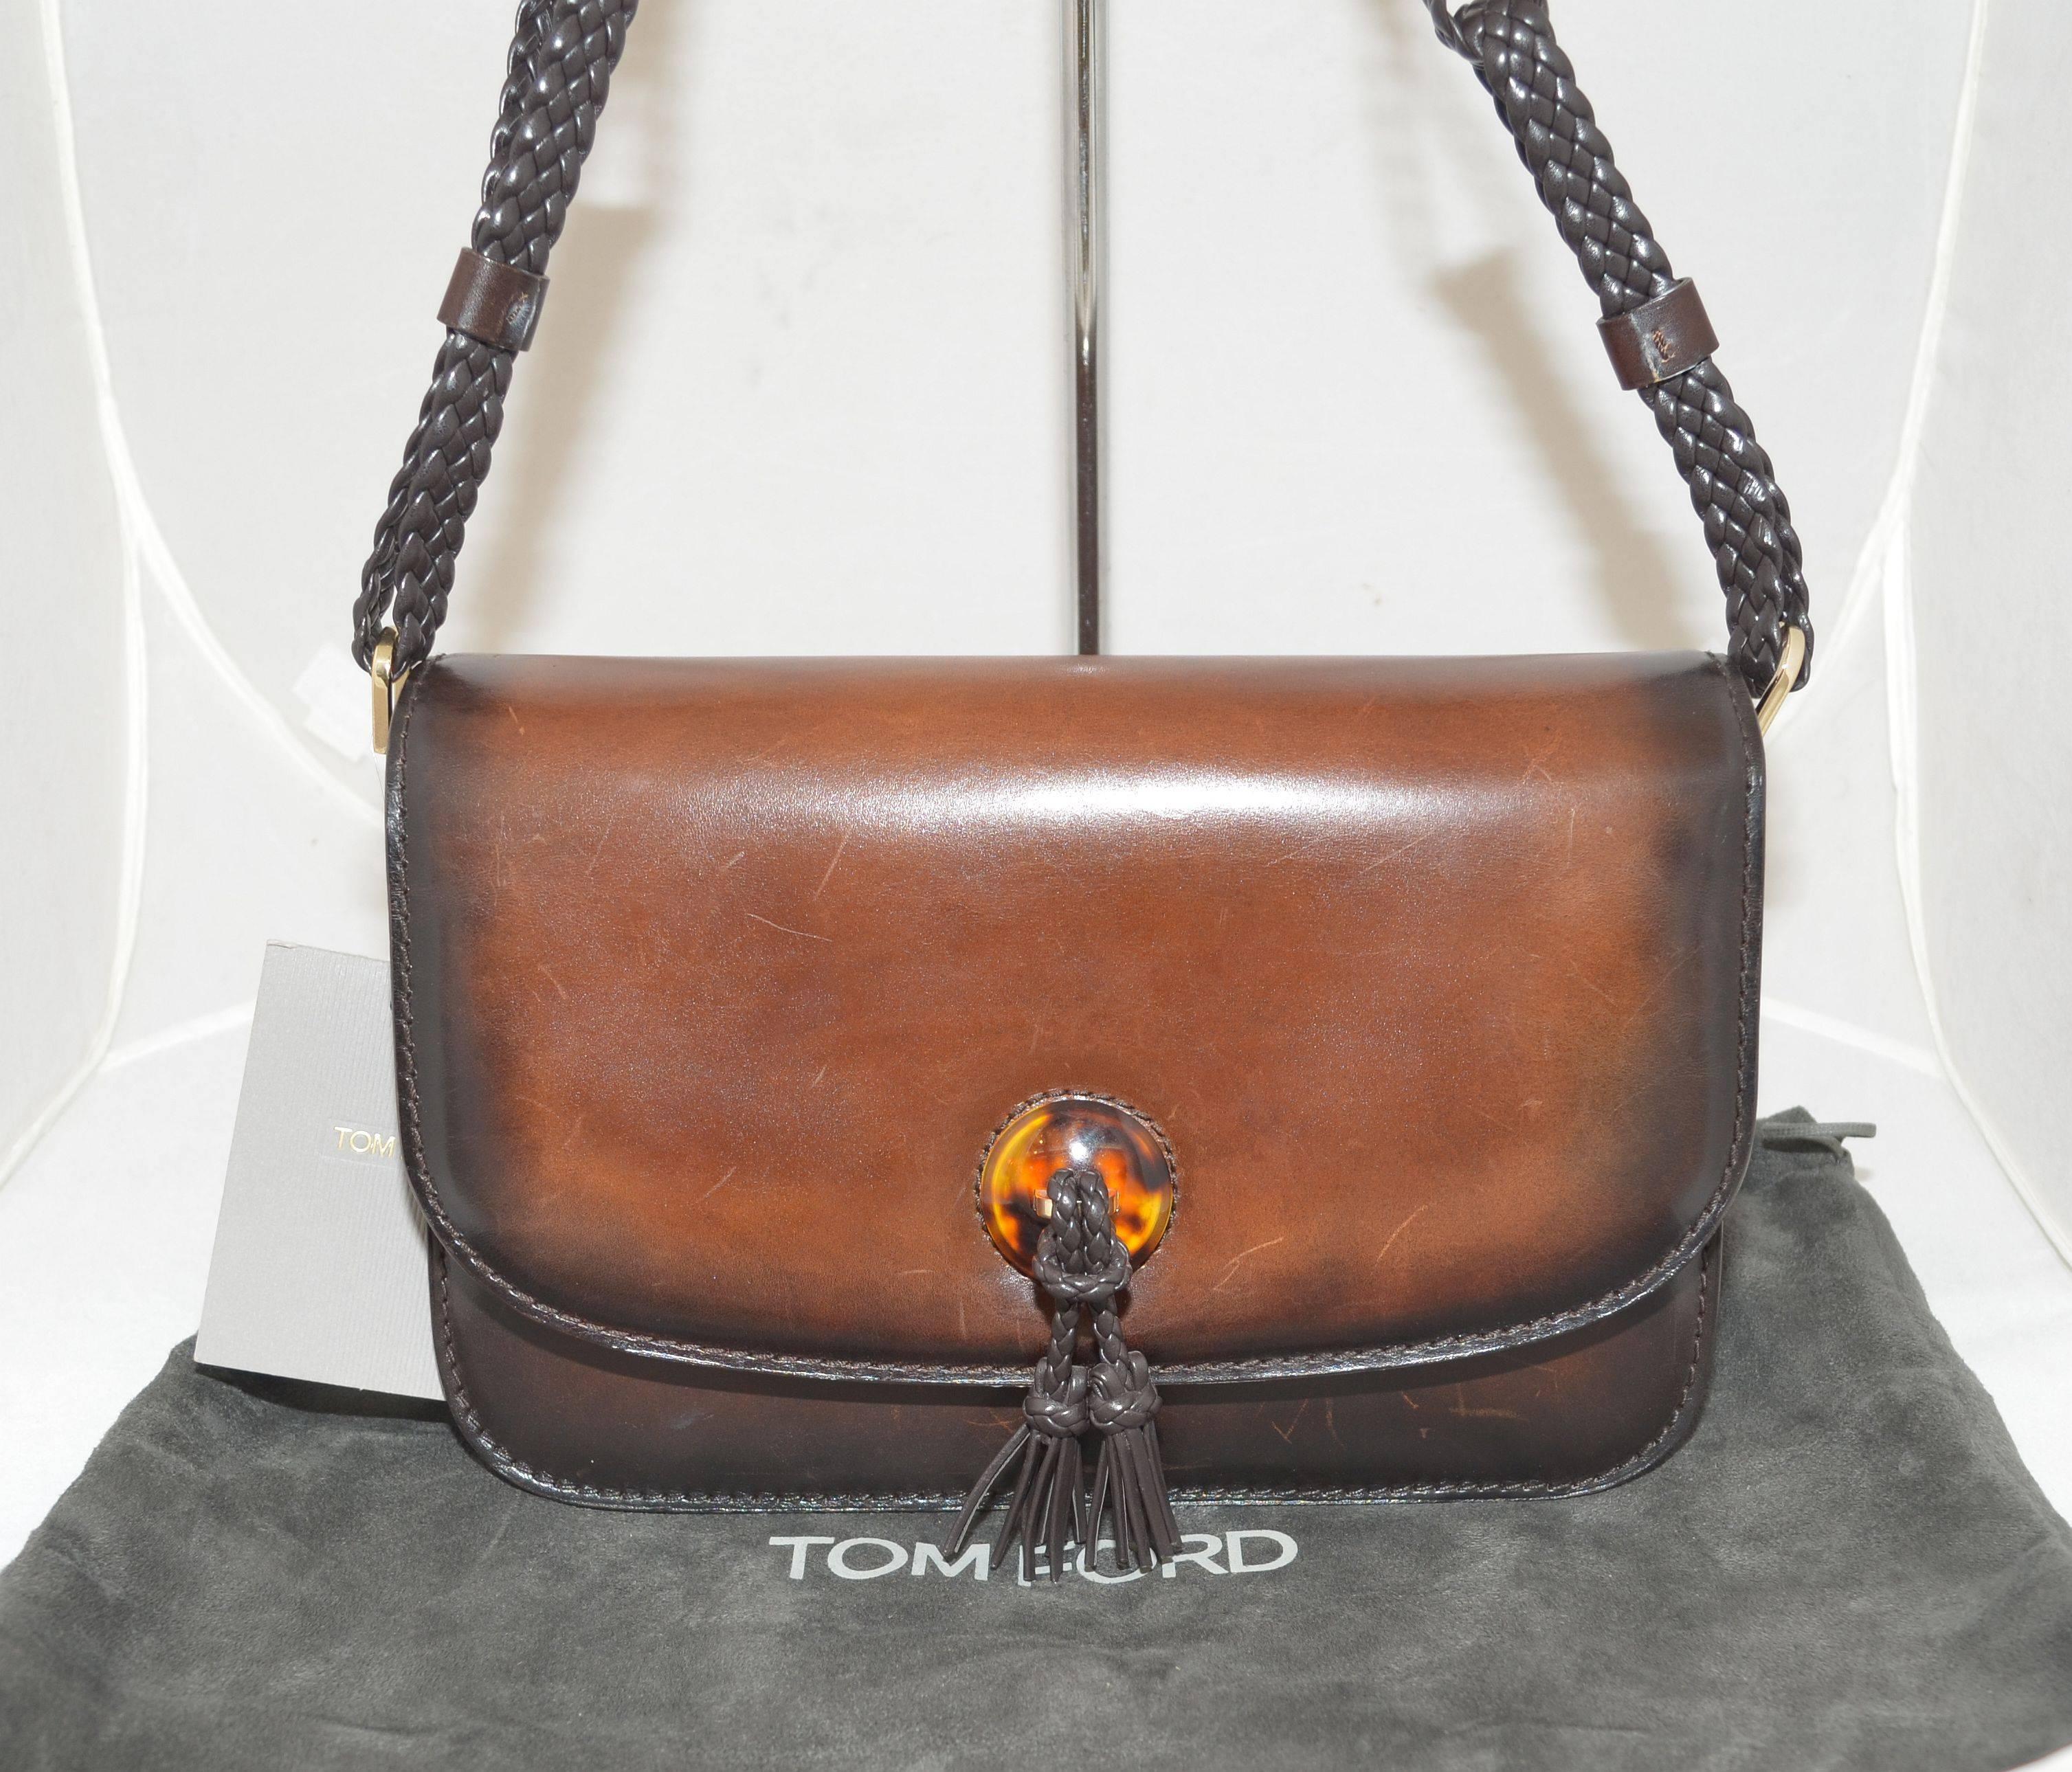 Tom Ford bag features a braided leather shoulder strap, magnetic snap closure, tassel applique at the front center, and a tortoise trim around the base of the bag. Interior has three compartments; 2 open compartments and a center zipper compartment.